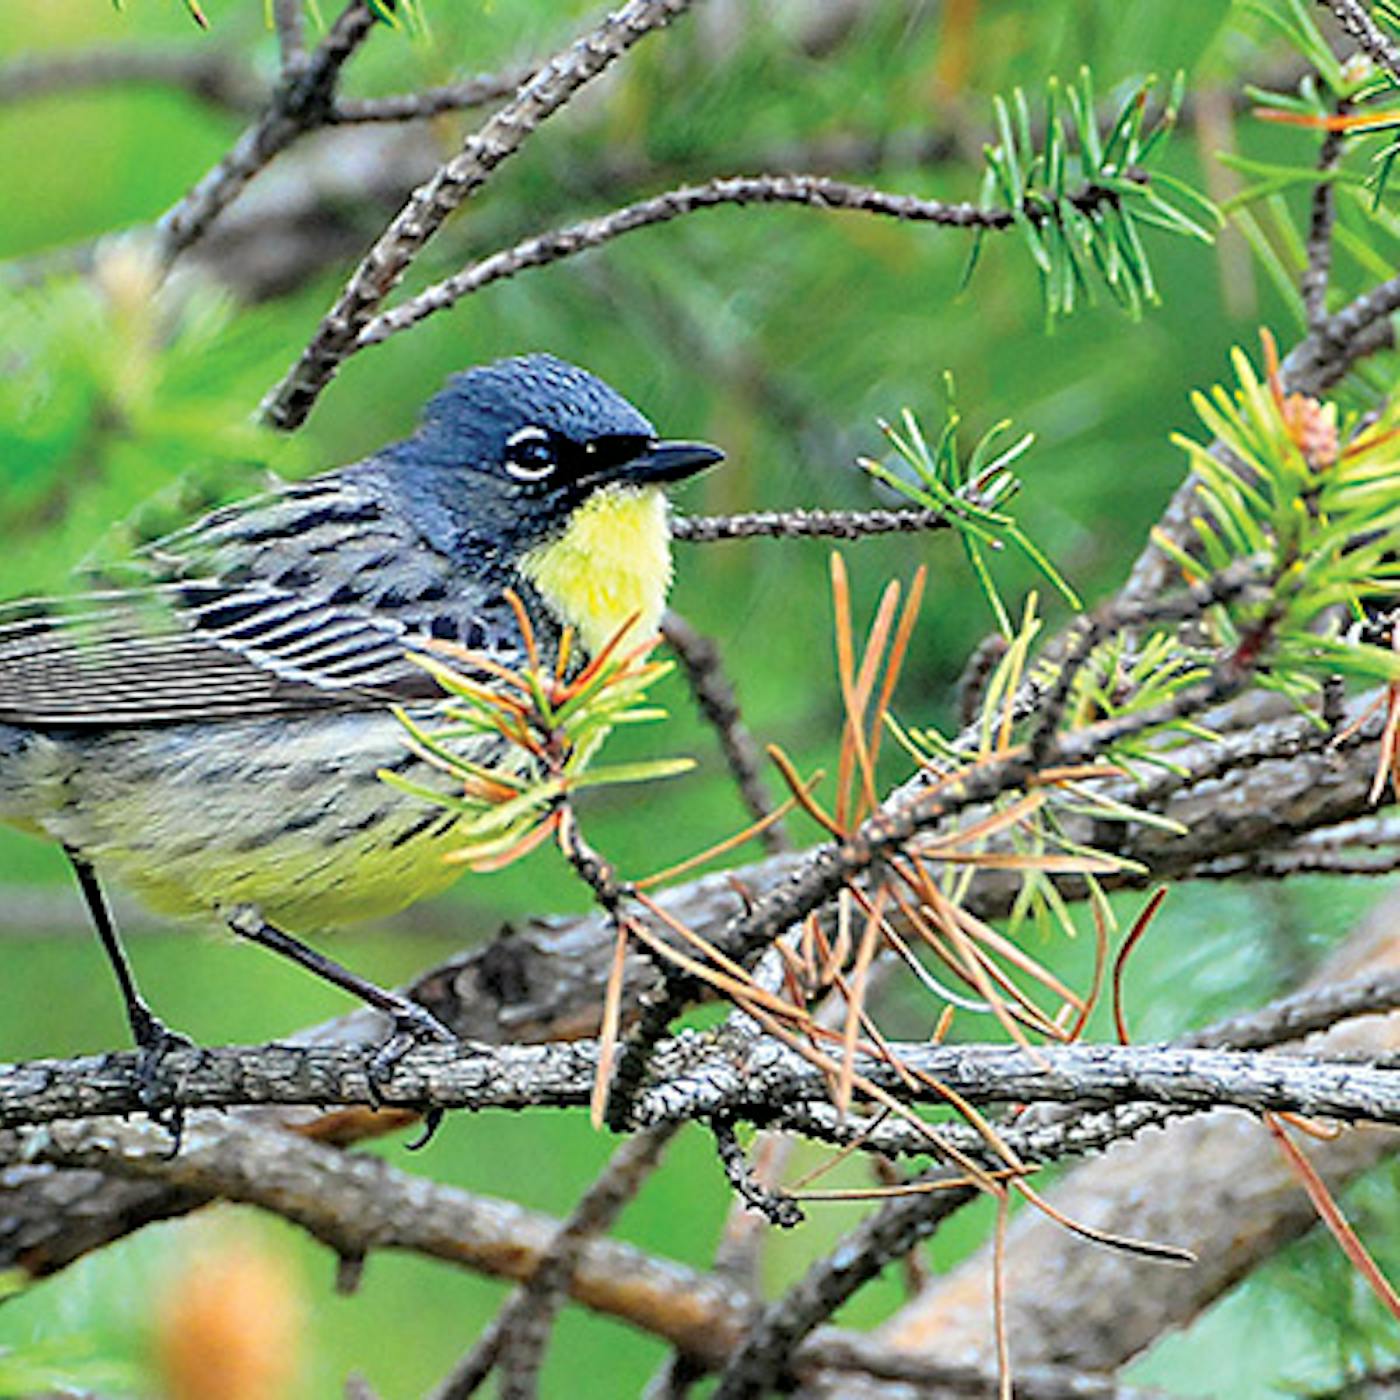 Kirtland's Warbler in a tree in Grayling, Michigan (photo courtesy of Kirtland's Warbler Tours))